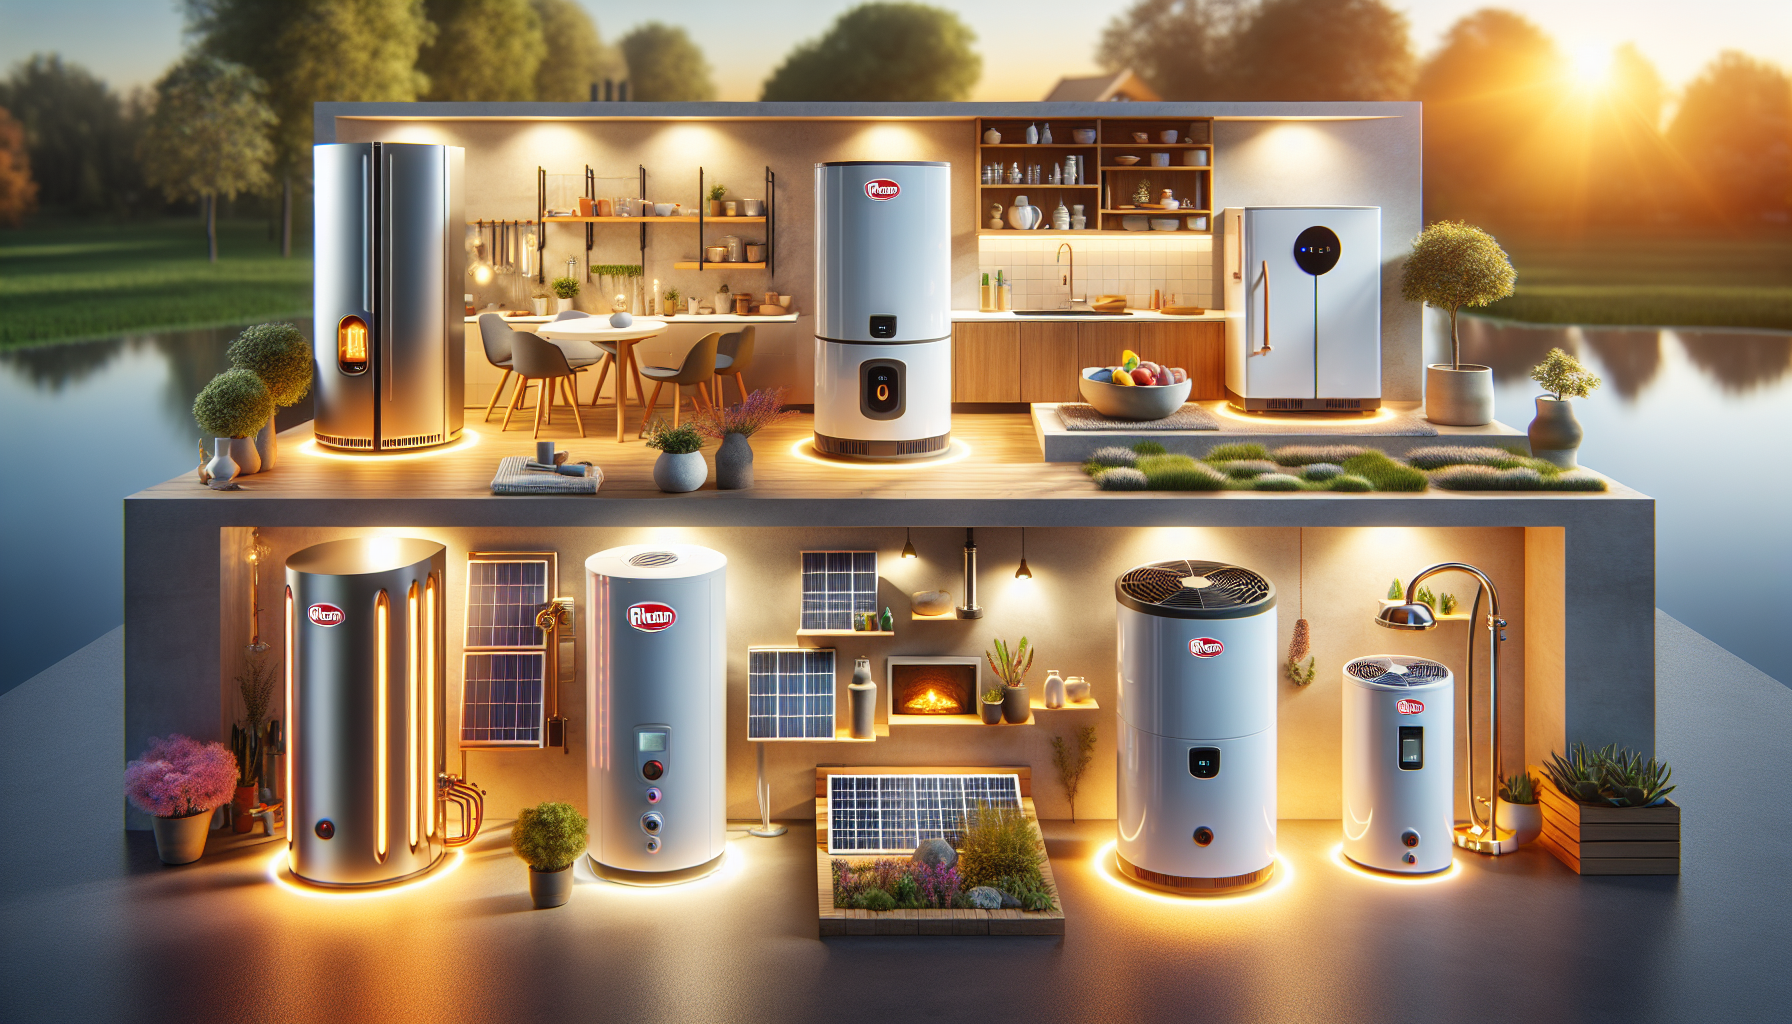 Various Rheem hot water systems including gas, electric, solar, and heat pump options